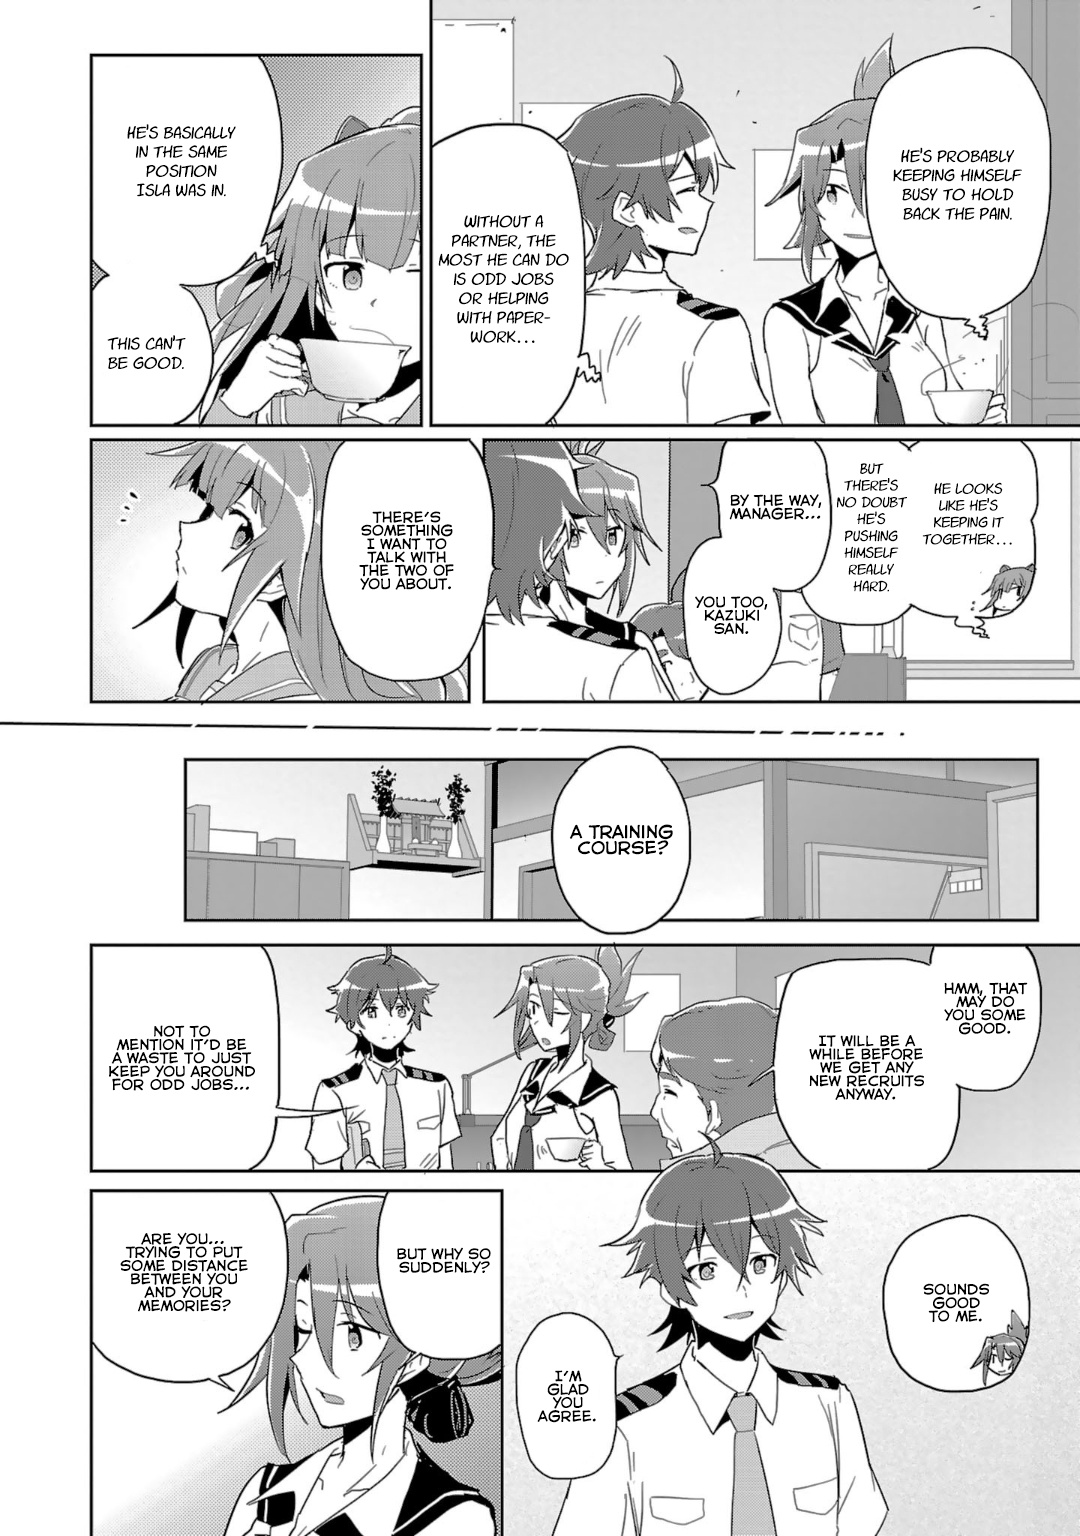 Plastic Memories - Say To Good-Bye Vol.3 Chapter 20: Memories: 20 - Picture 2